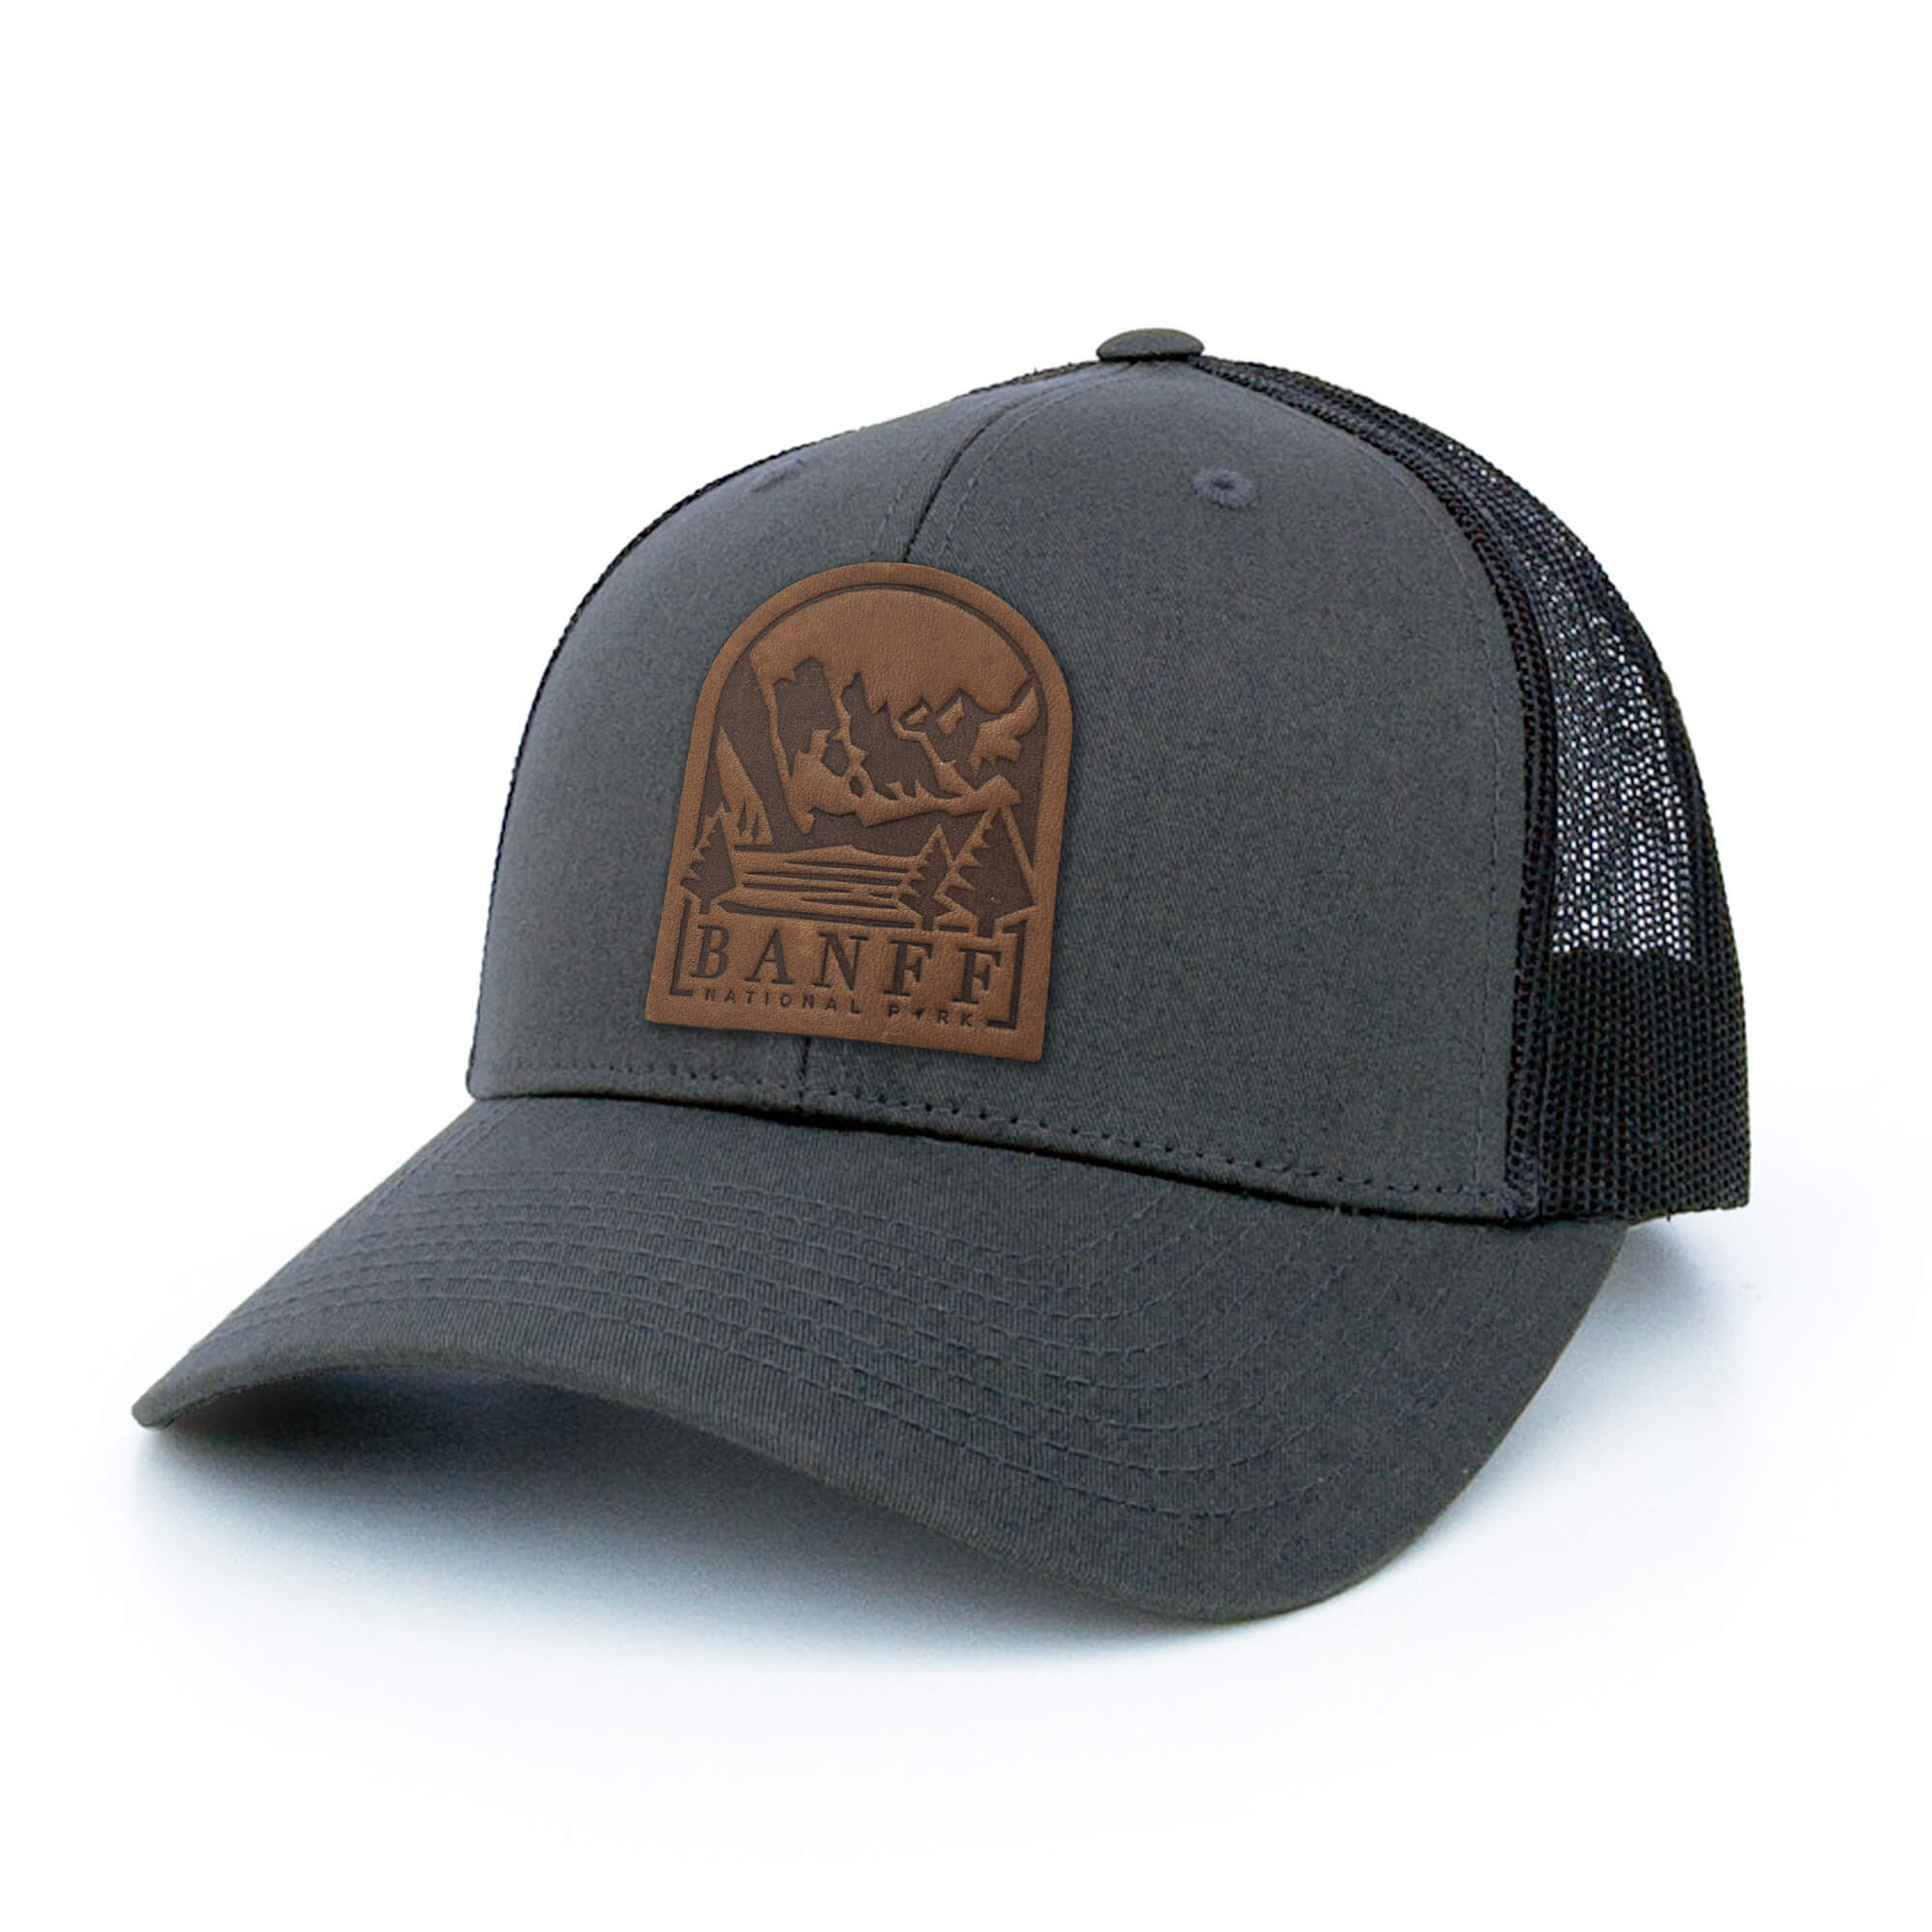 Charcoal trucker hat with full-grain leather patch of Banff National Park | BLACK-007-001, CHARC-007-001, NAVY-007-001, HGREY-007-001, MOSS-007-001, BROWN-007-001